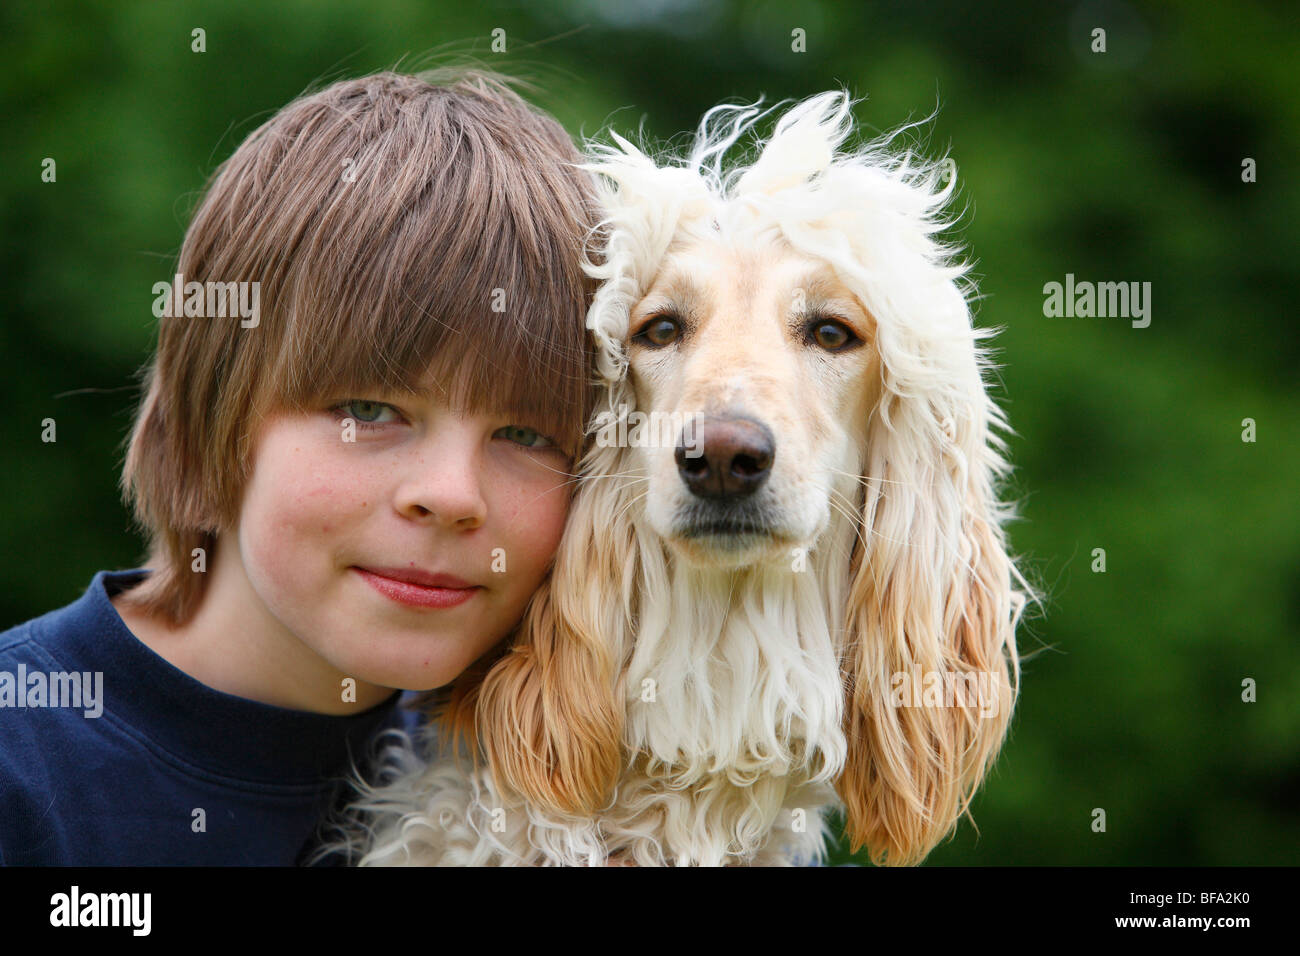 Afghanistan Hound, Afghan Hound (Canis lupus f. familiaris), boy with his dog, Germany Stock Photo